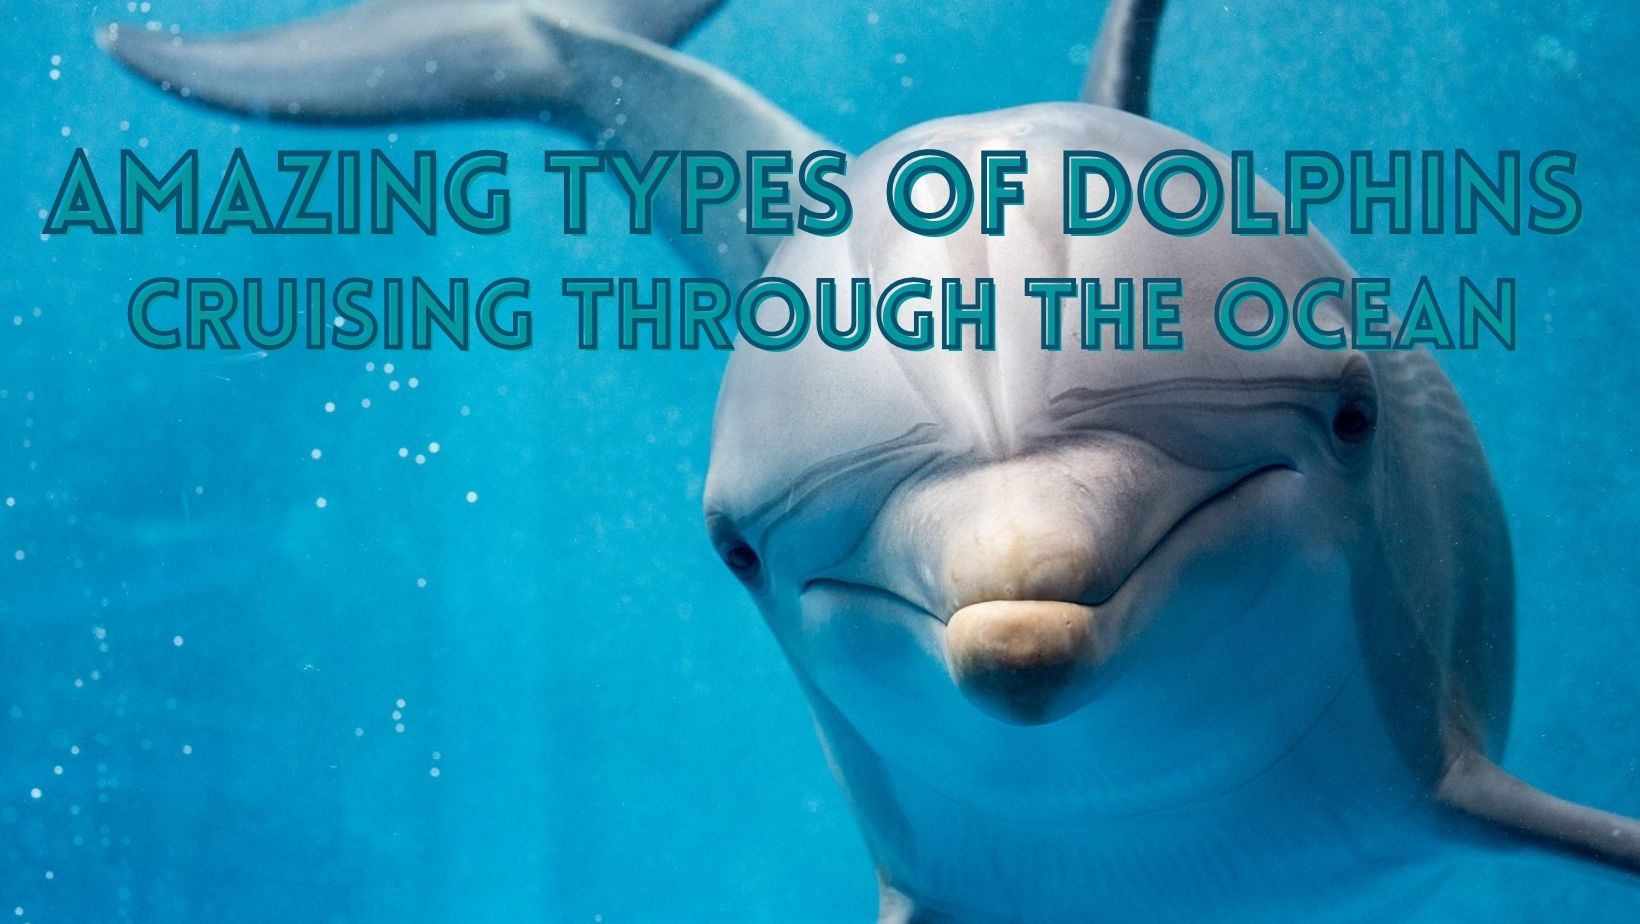 Amazing types of dolphins